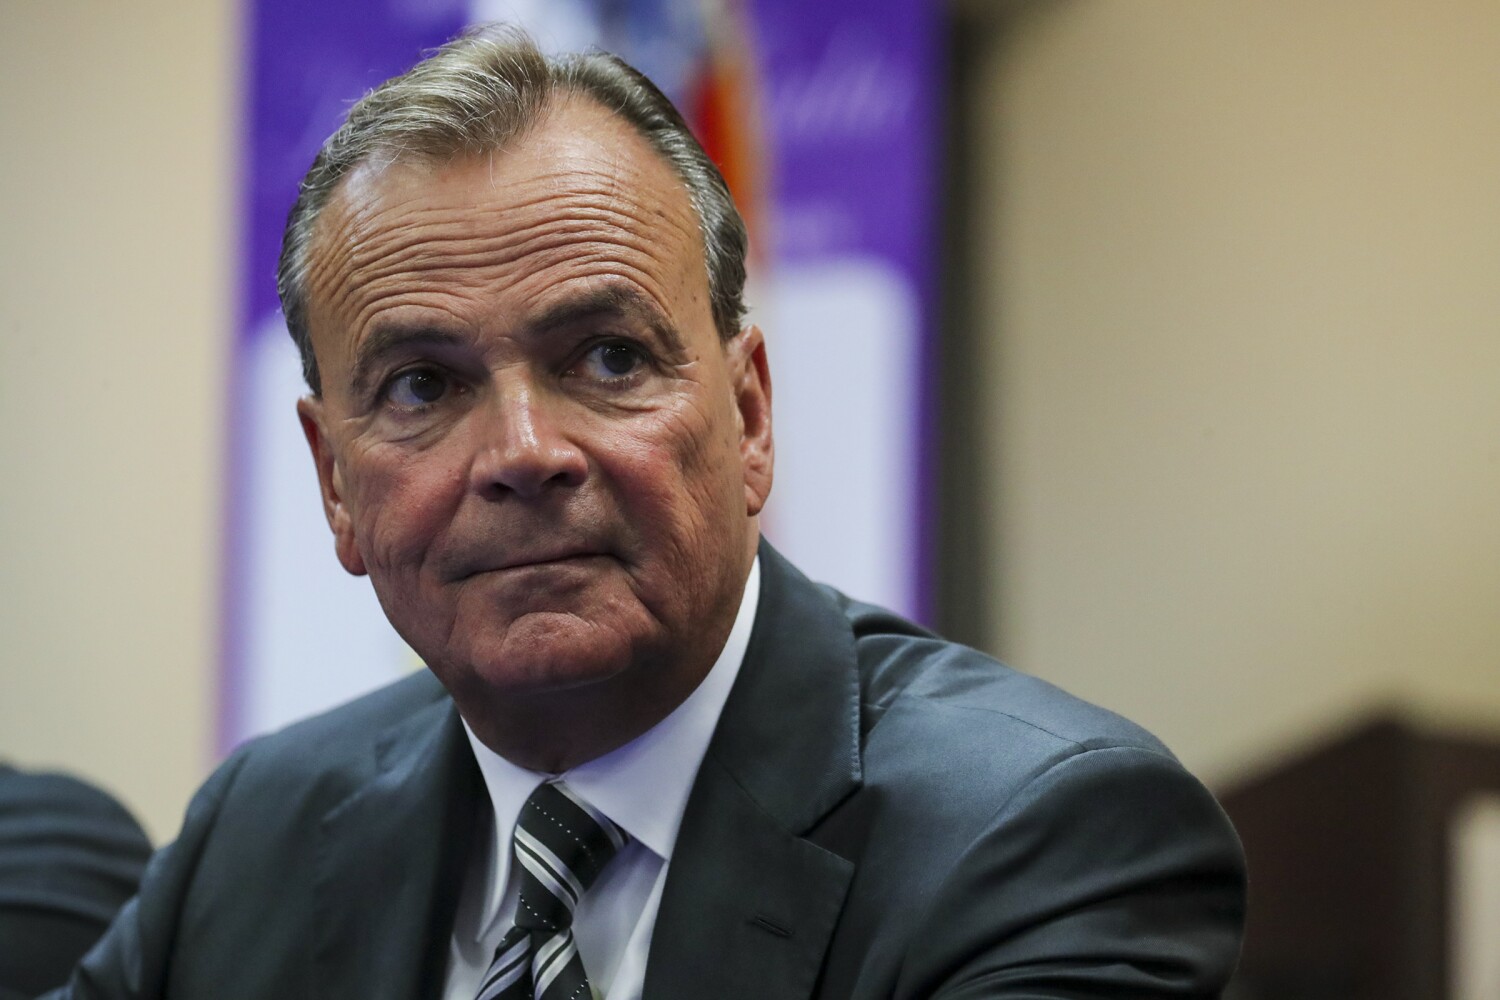 Rick Caruso's role in the 2002 rejection of a Black LAPD chief created a furor